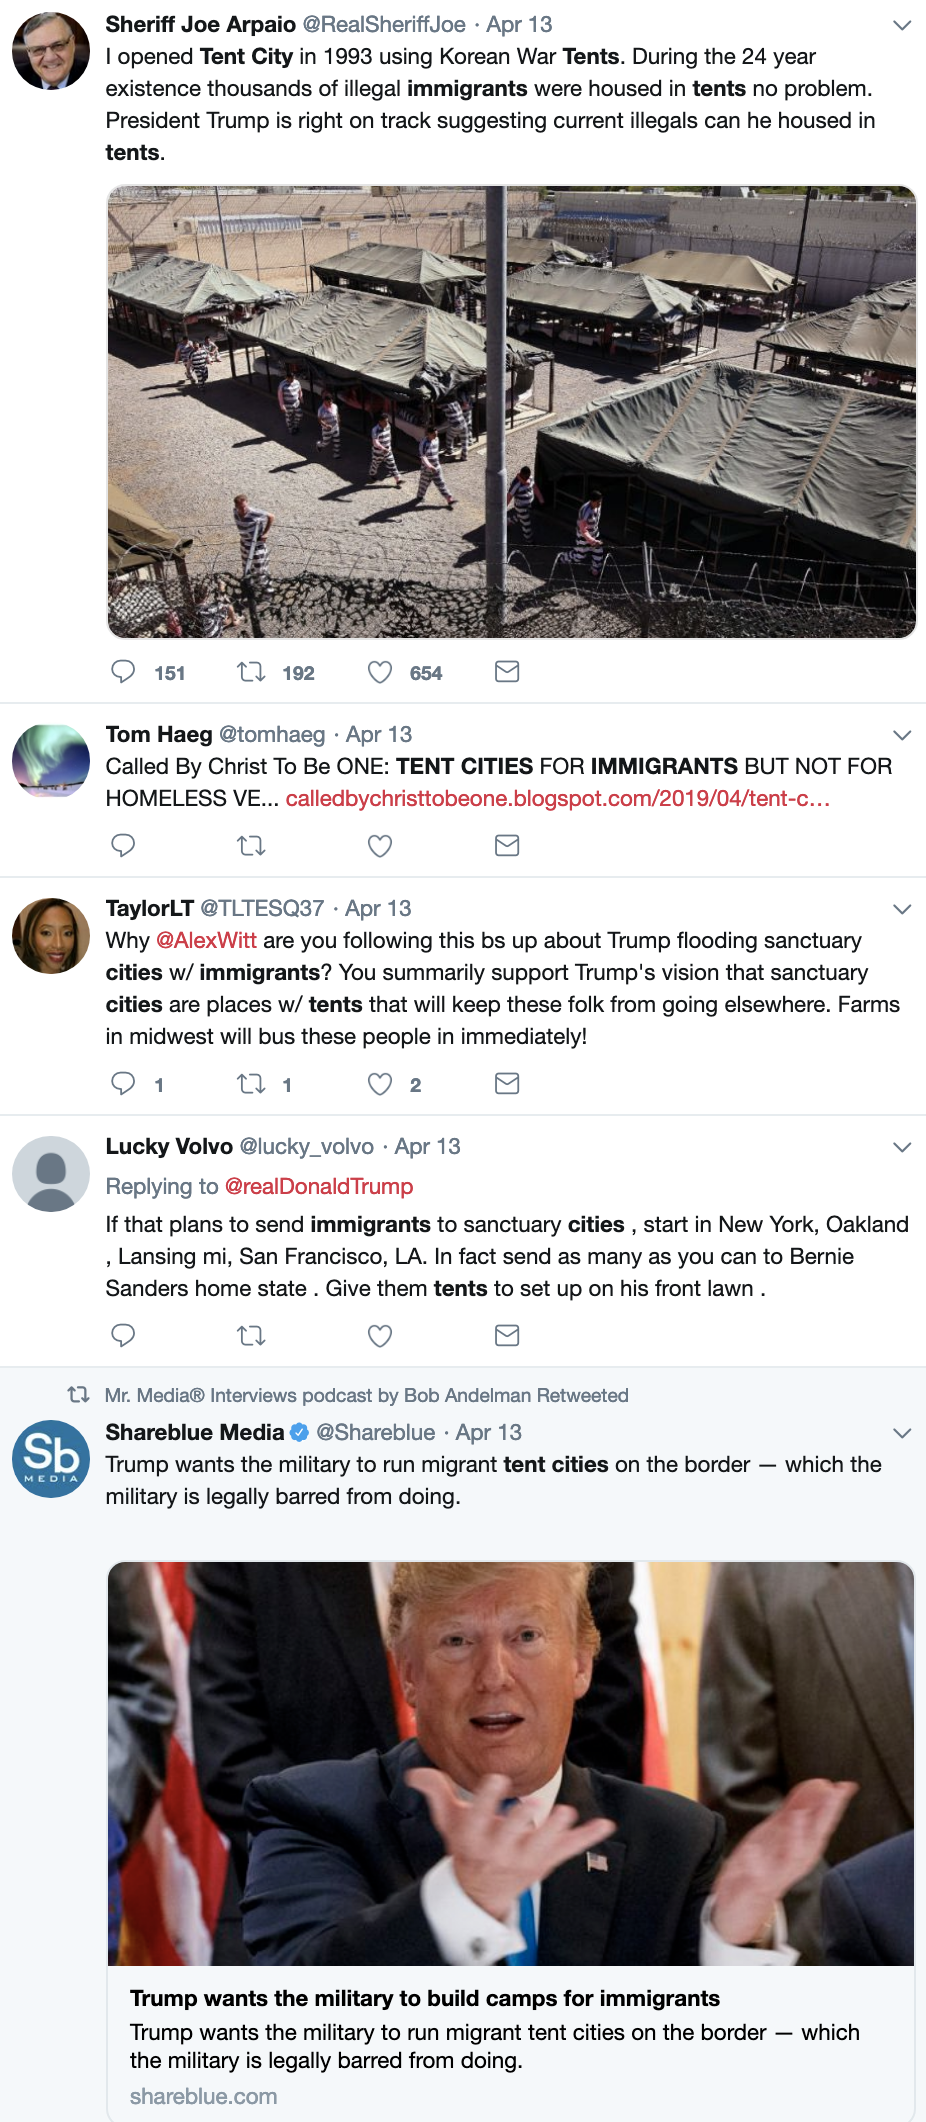 Screen-Shot-2019-04-15-at-2.33.43-PM Daily Beast Investigative Report Uncovers Inhumane Condition At Refugee Camps Corruption Crime Donald Trump Immigration Politics Racism Refugees Top Stories 